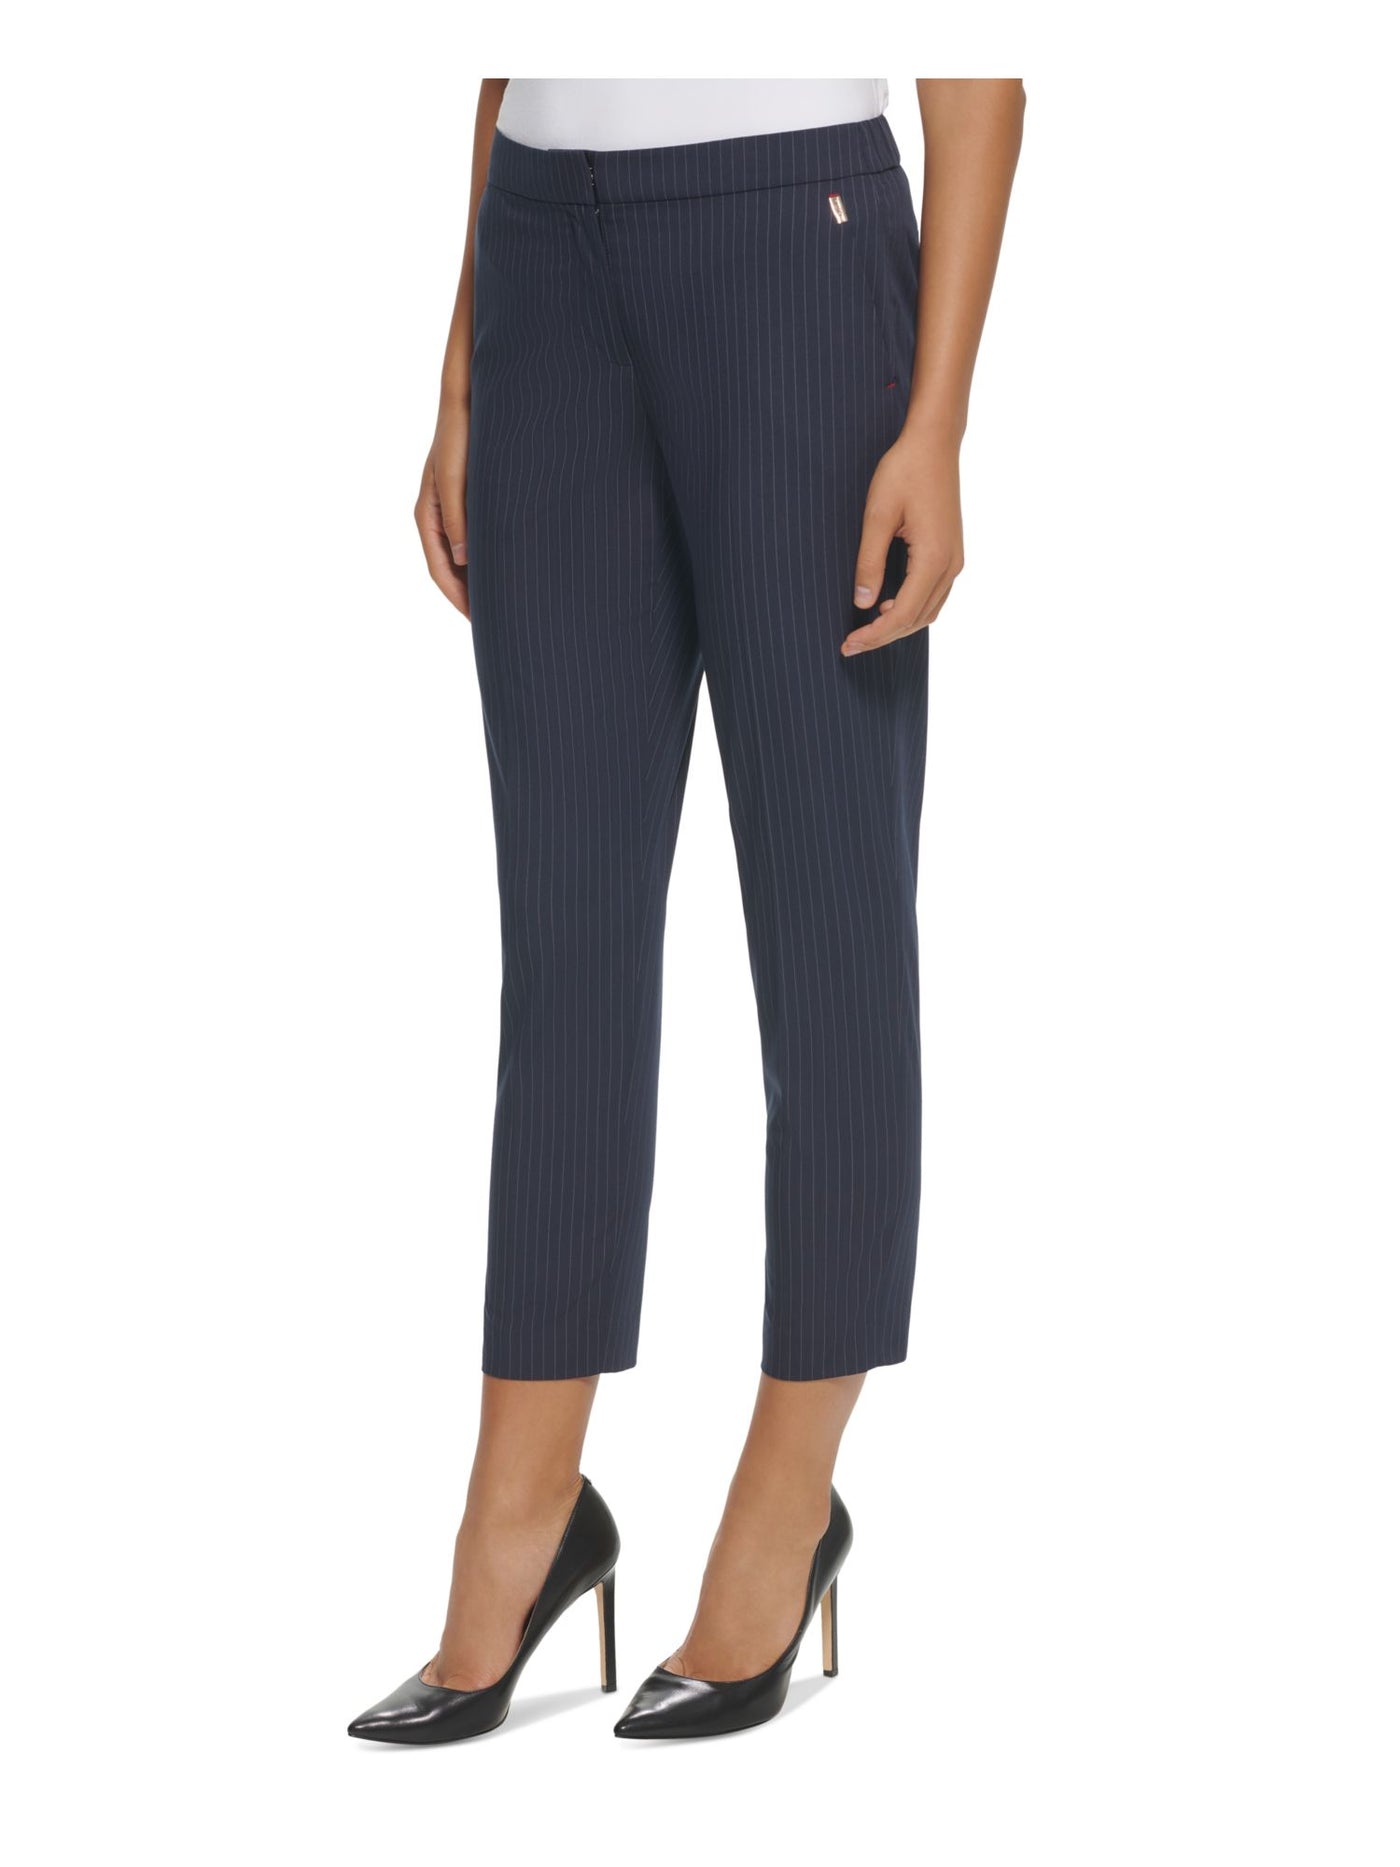 TOMMY HILFIGER Womens Navy Zippered Pocketed Hook And Bar Closure Pinstripe Wear To Work Cropped Pants 14